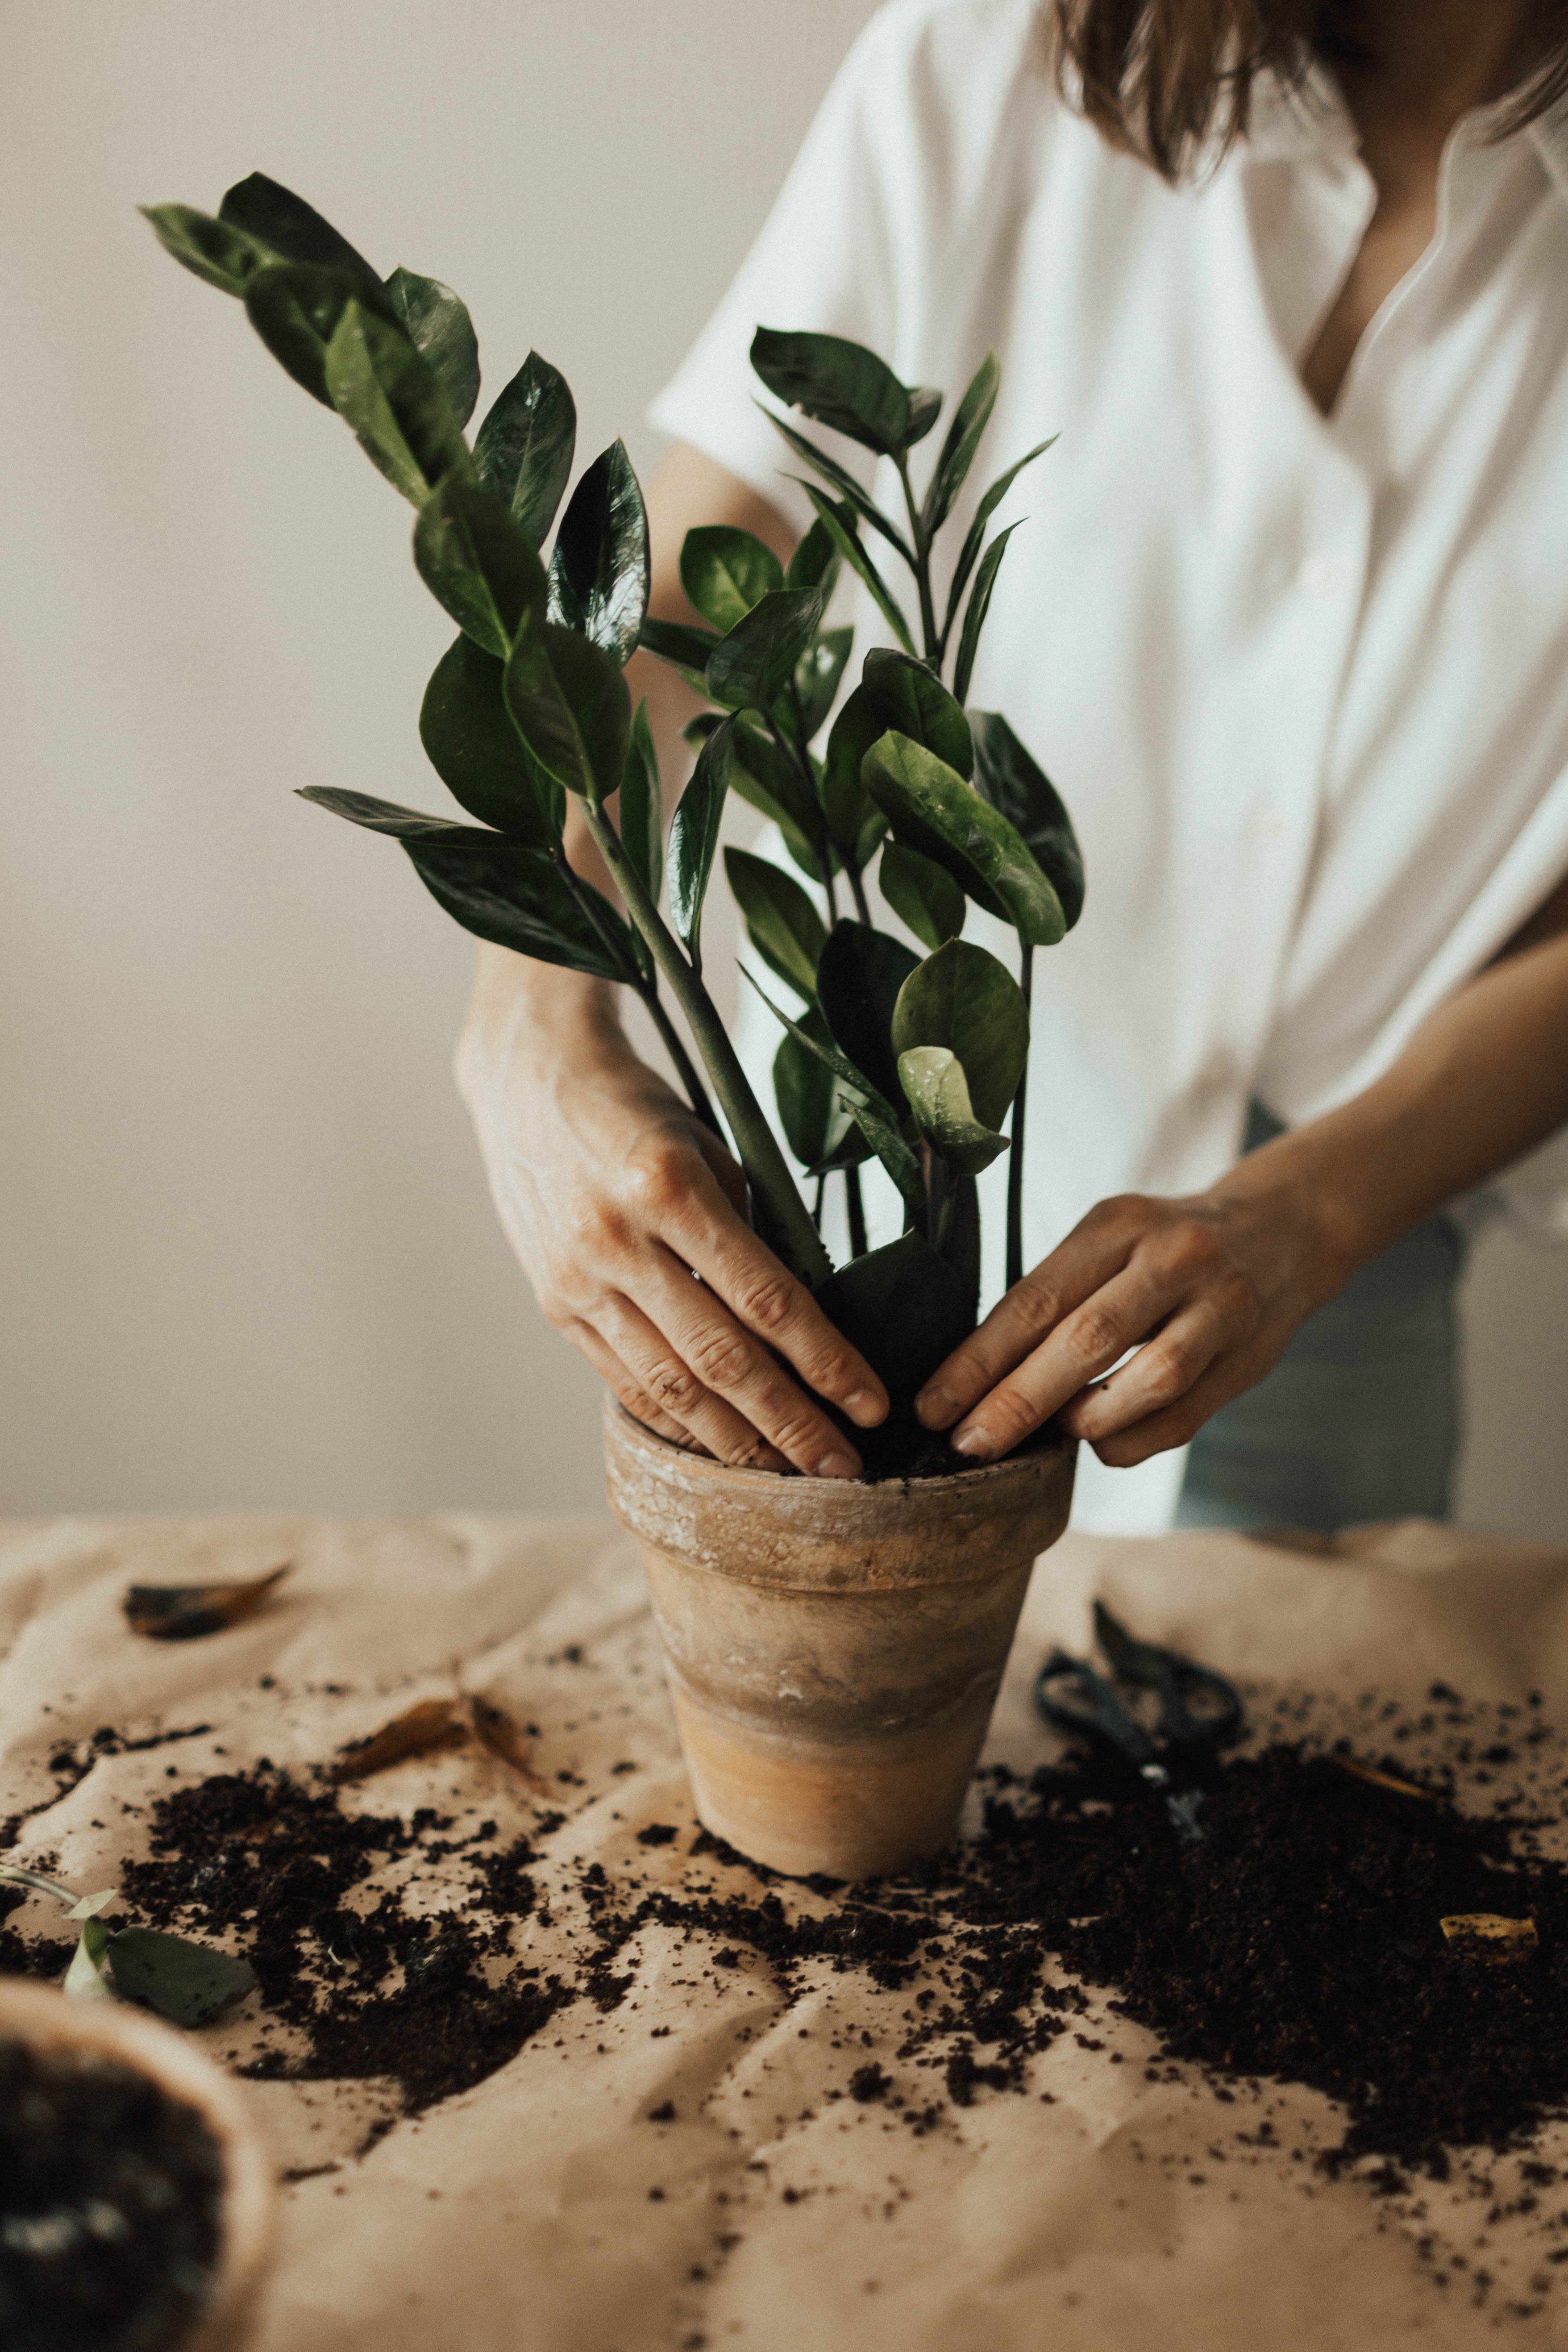 Emily asked for help in tending to her garden as she wasn't feeling well. | Source: Pexels